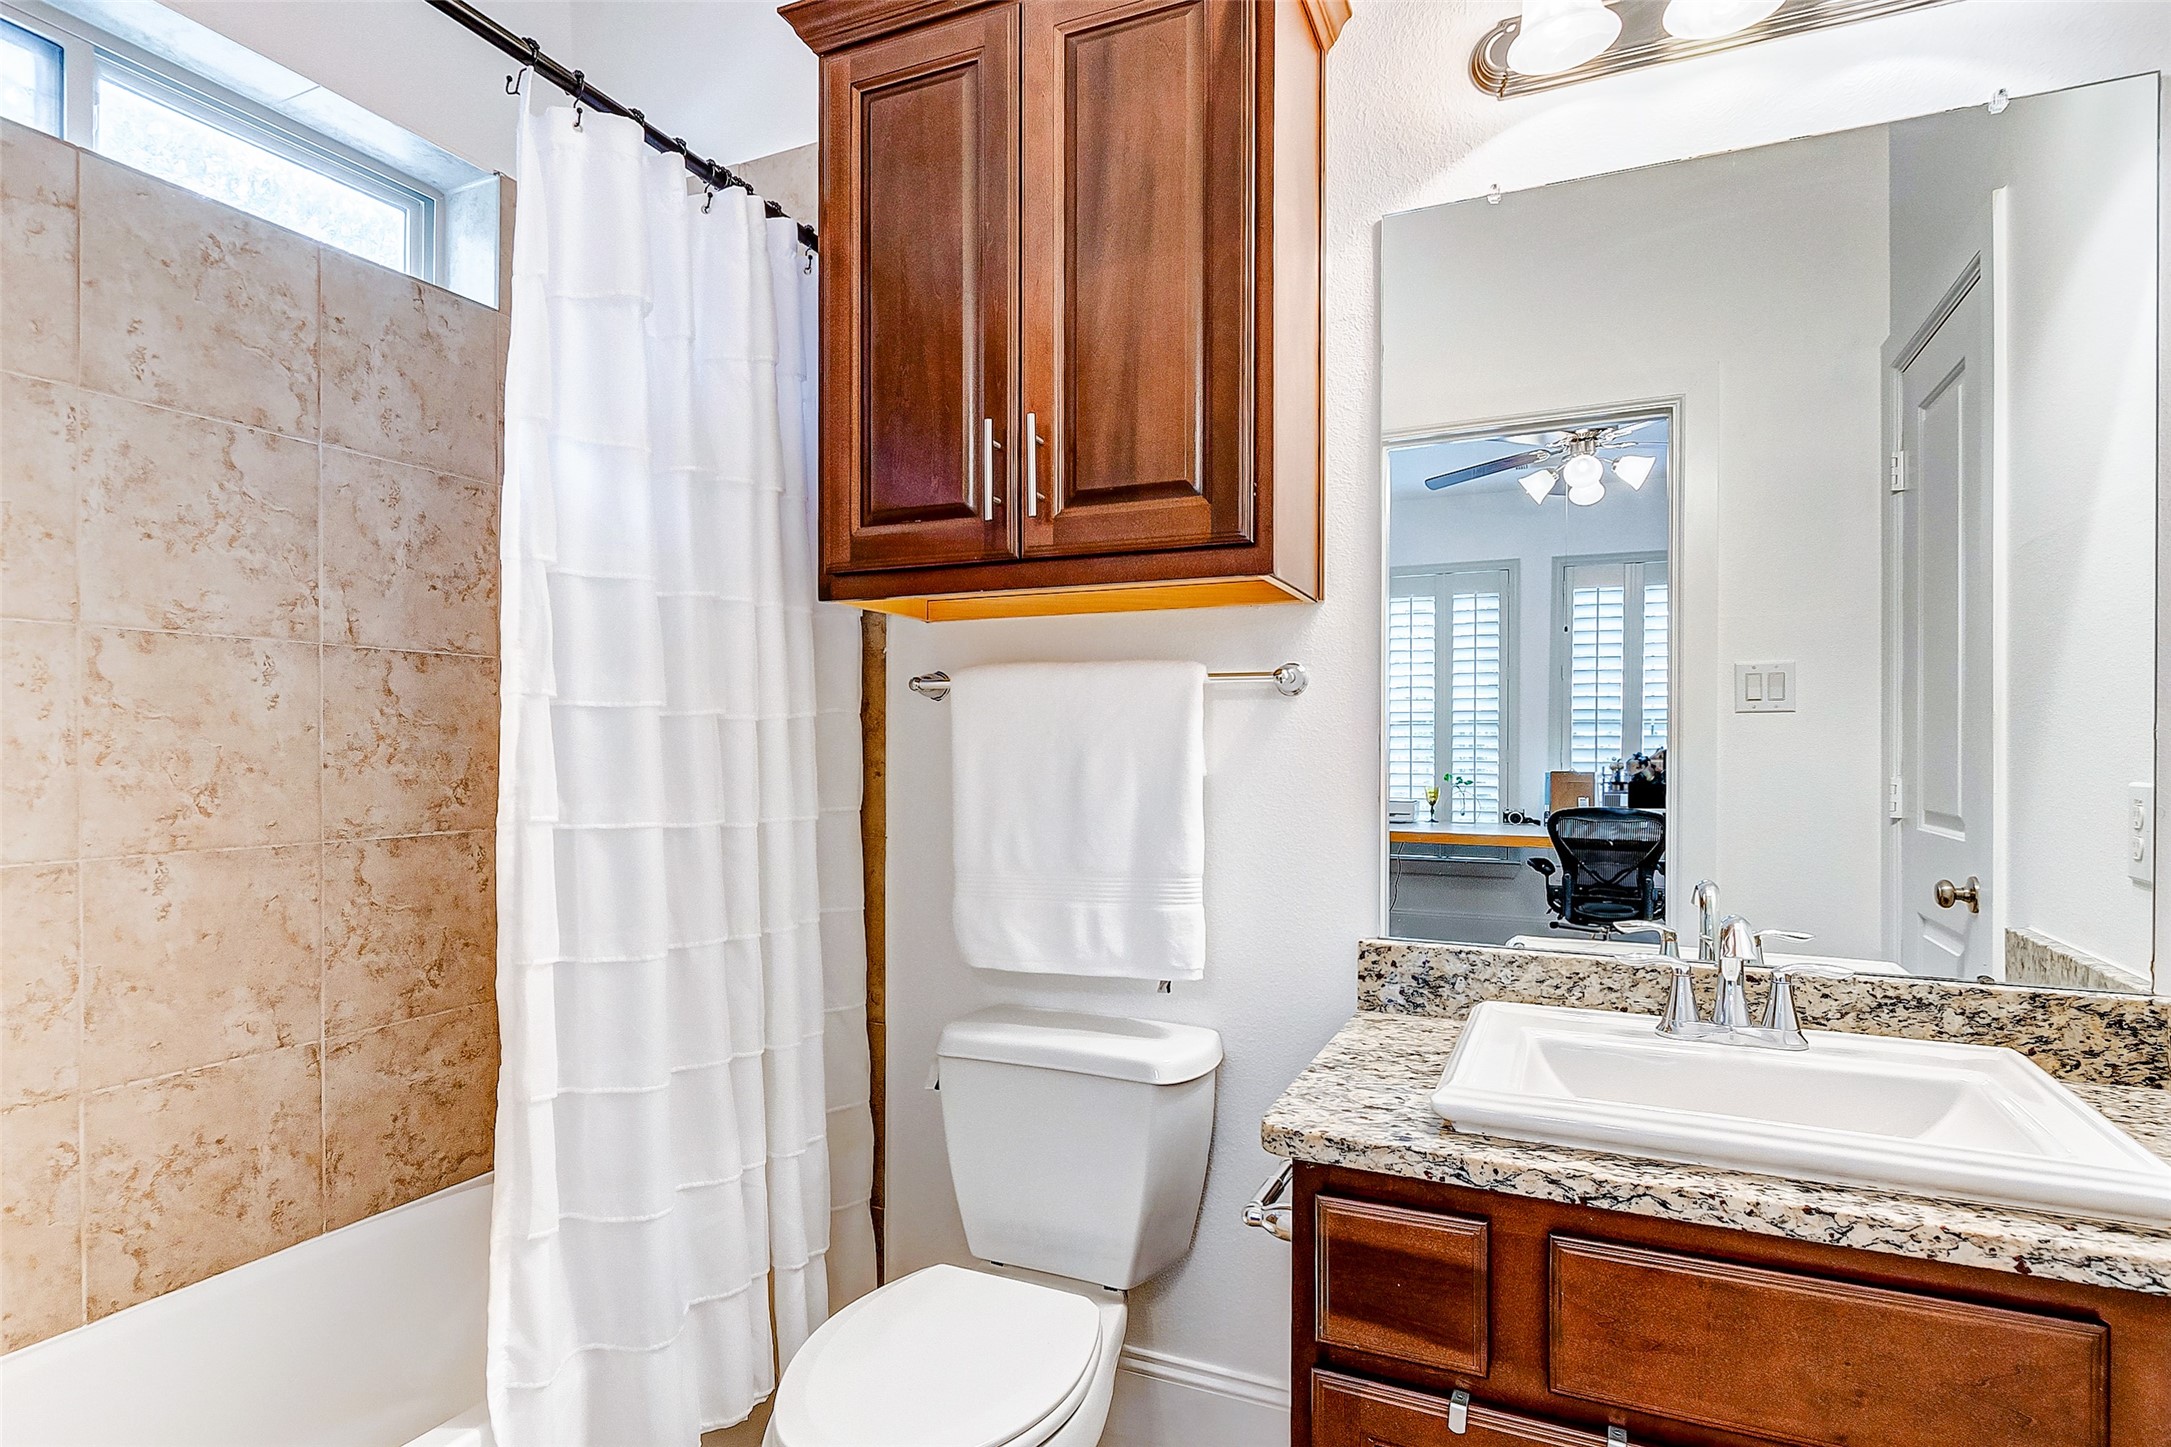 The first floor bedroom offers its own private bathroom featuring granite countered vanity, shower/tub combo with tile surround, rich cabinetry, and nickel fixtures.